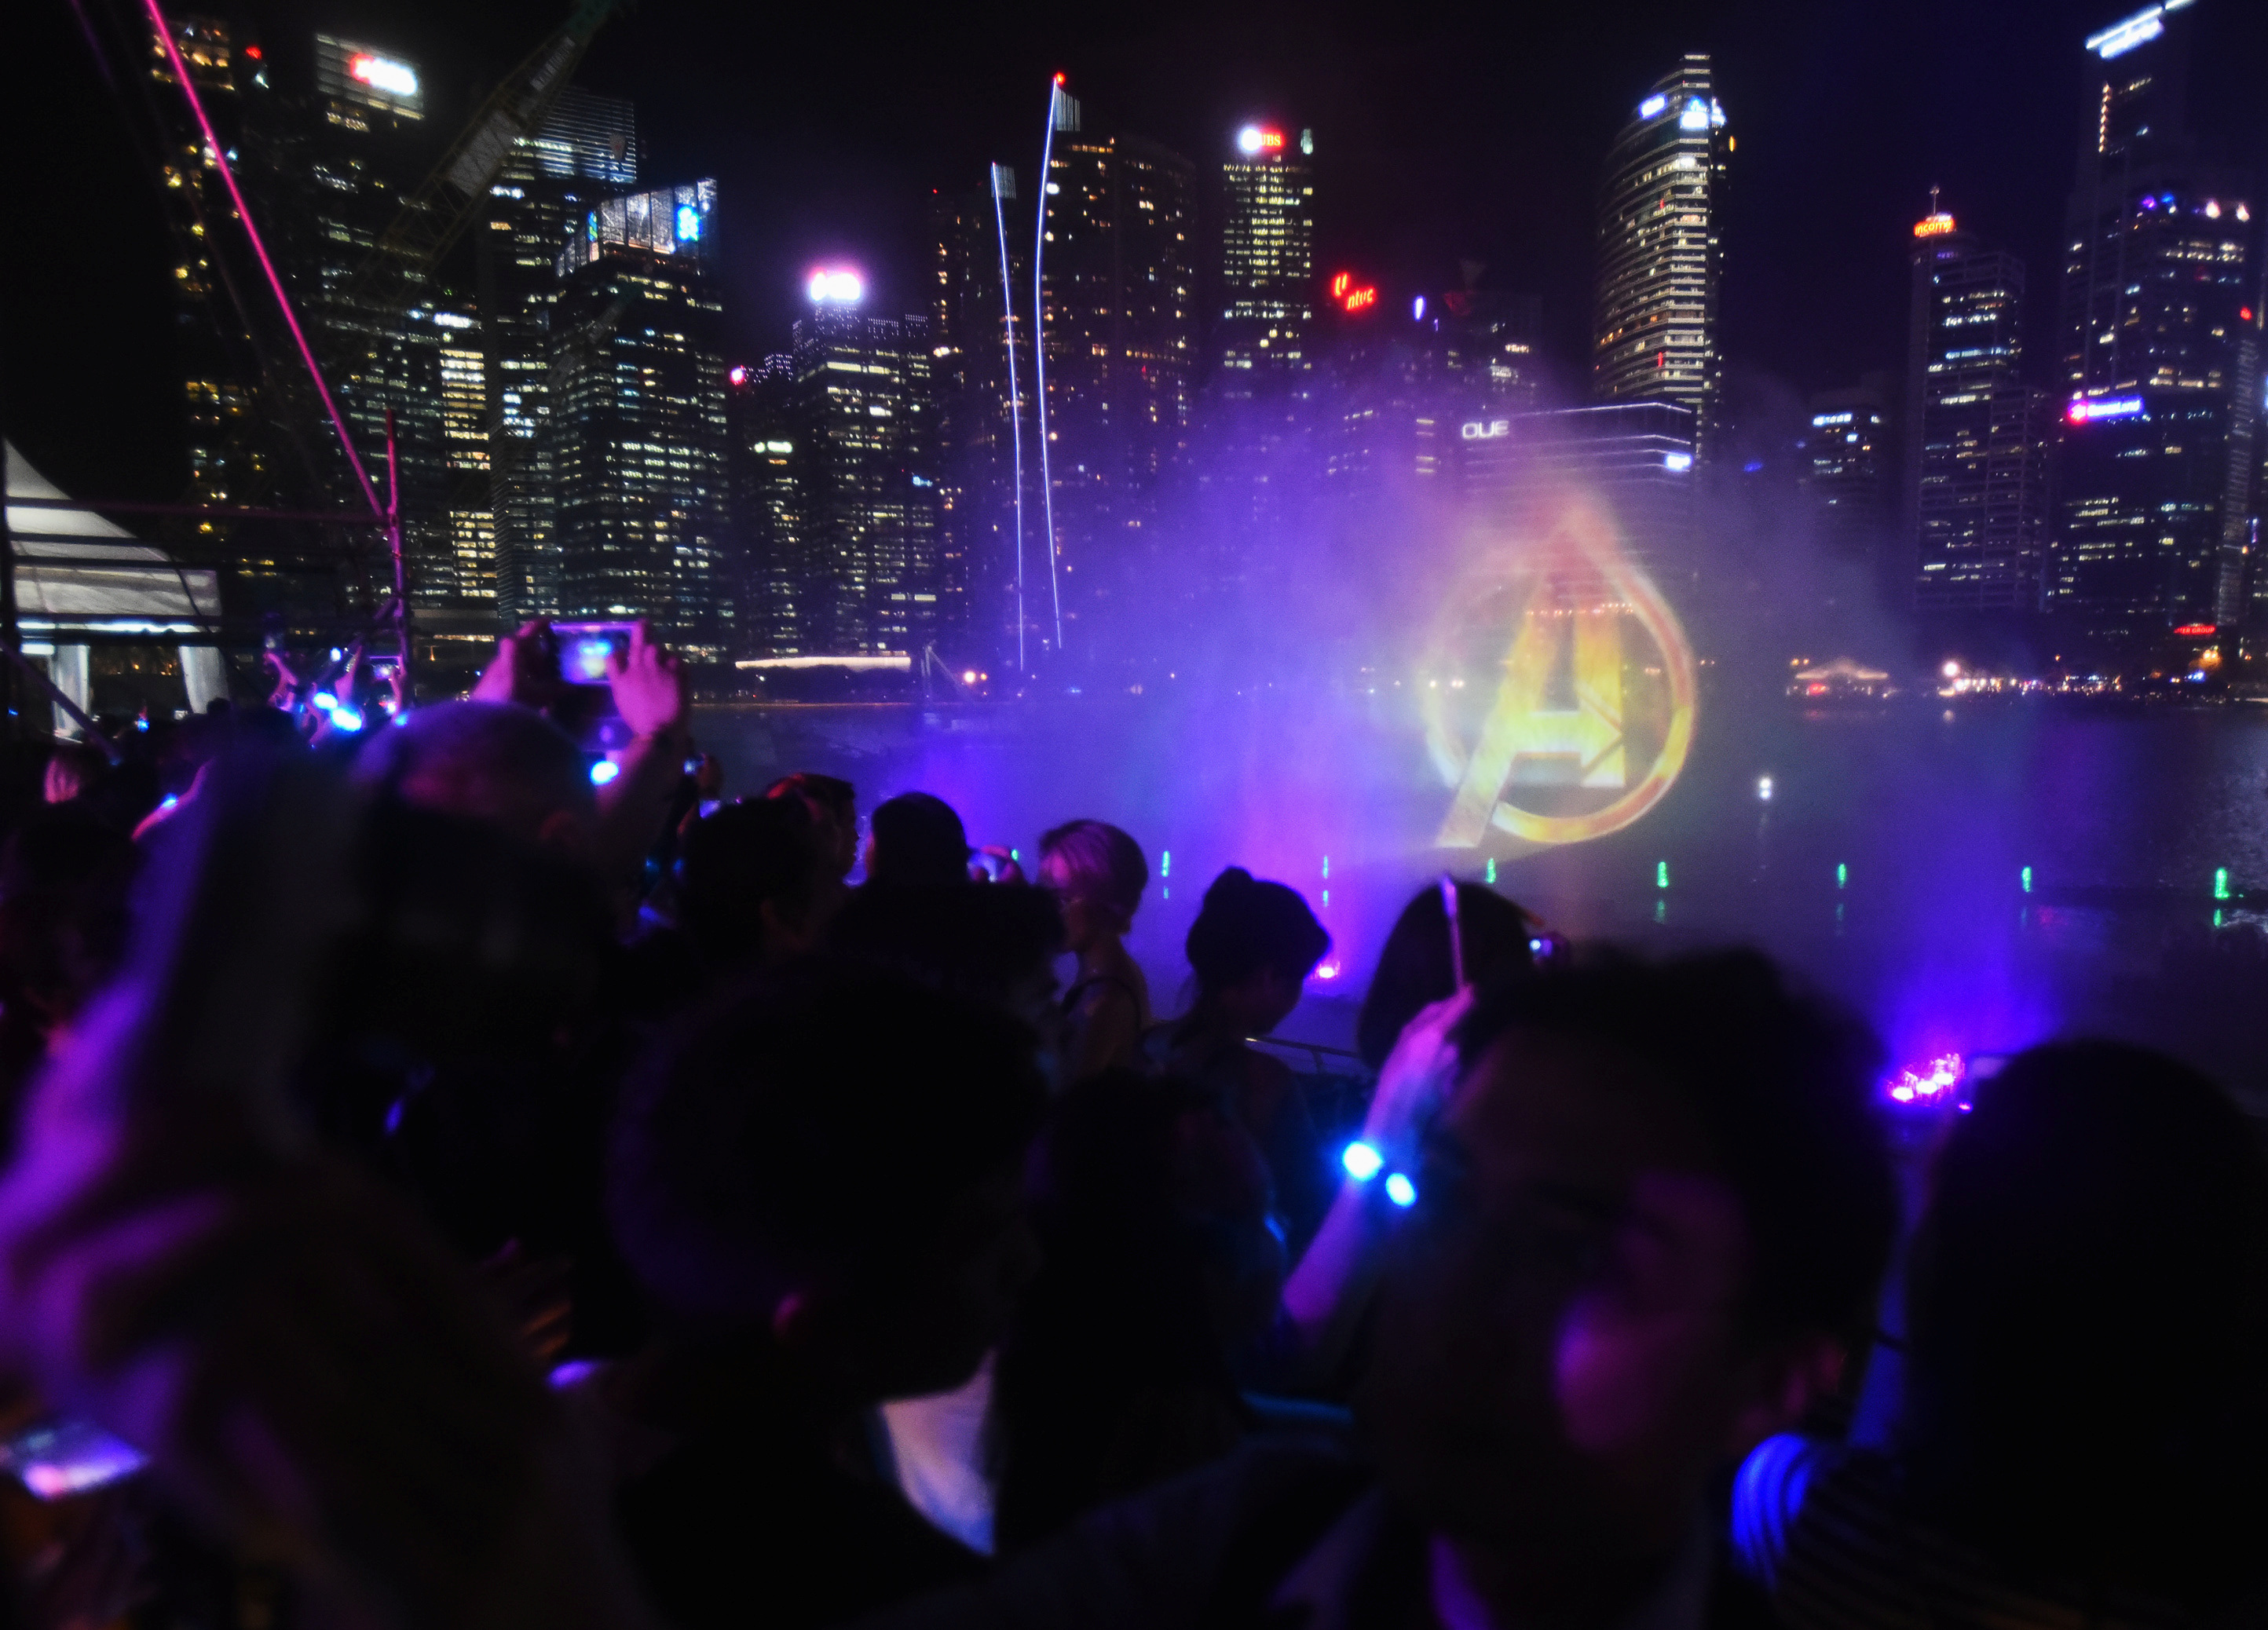 The Avengers logo is projected with the Singapore CBD skyline in the background, at a fan event for Marvel Studio's Avengers: Infinity War movie, in Singapore